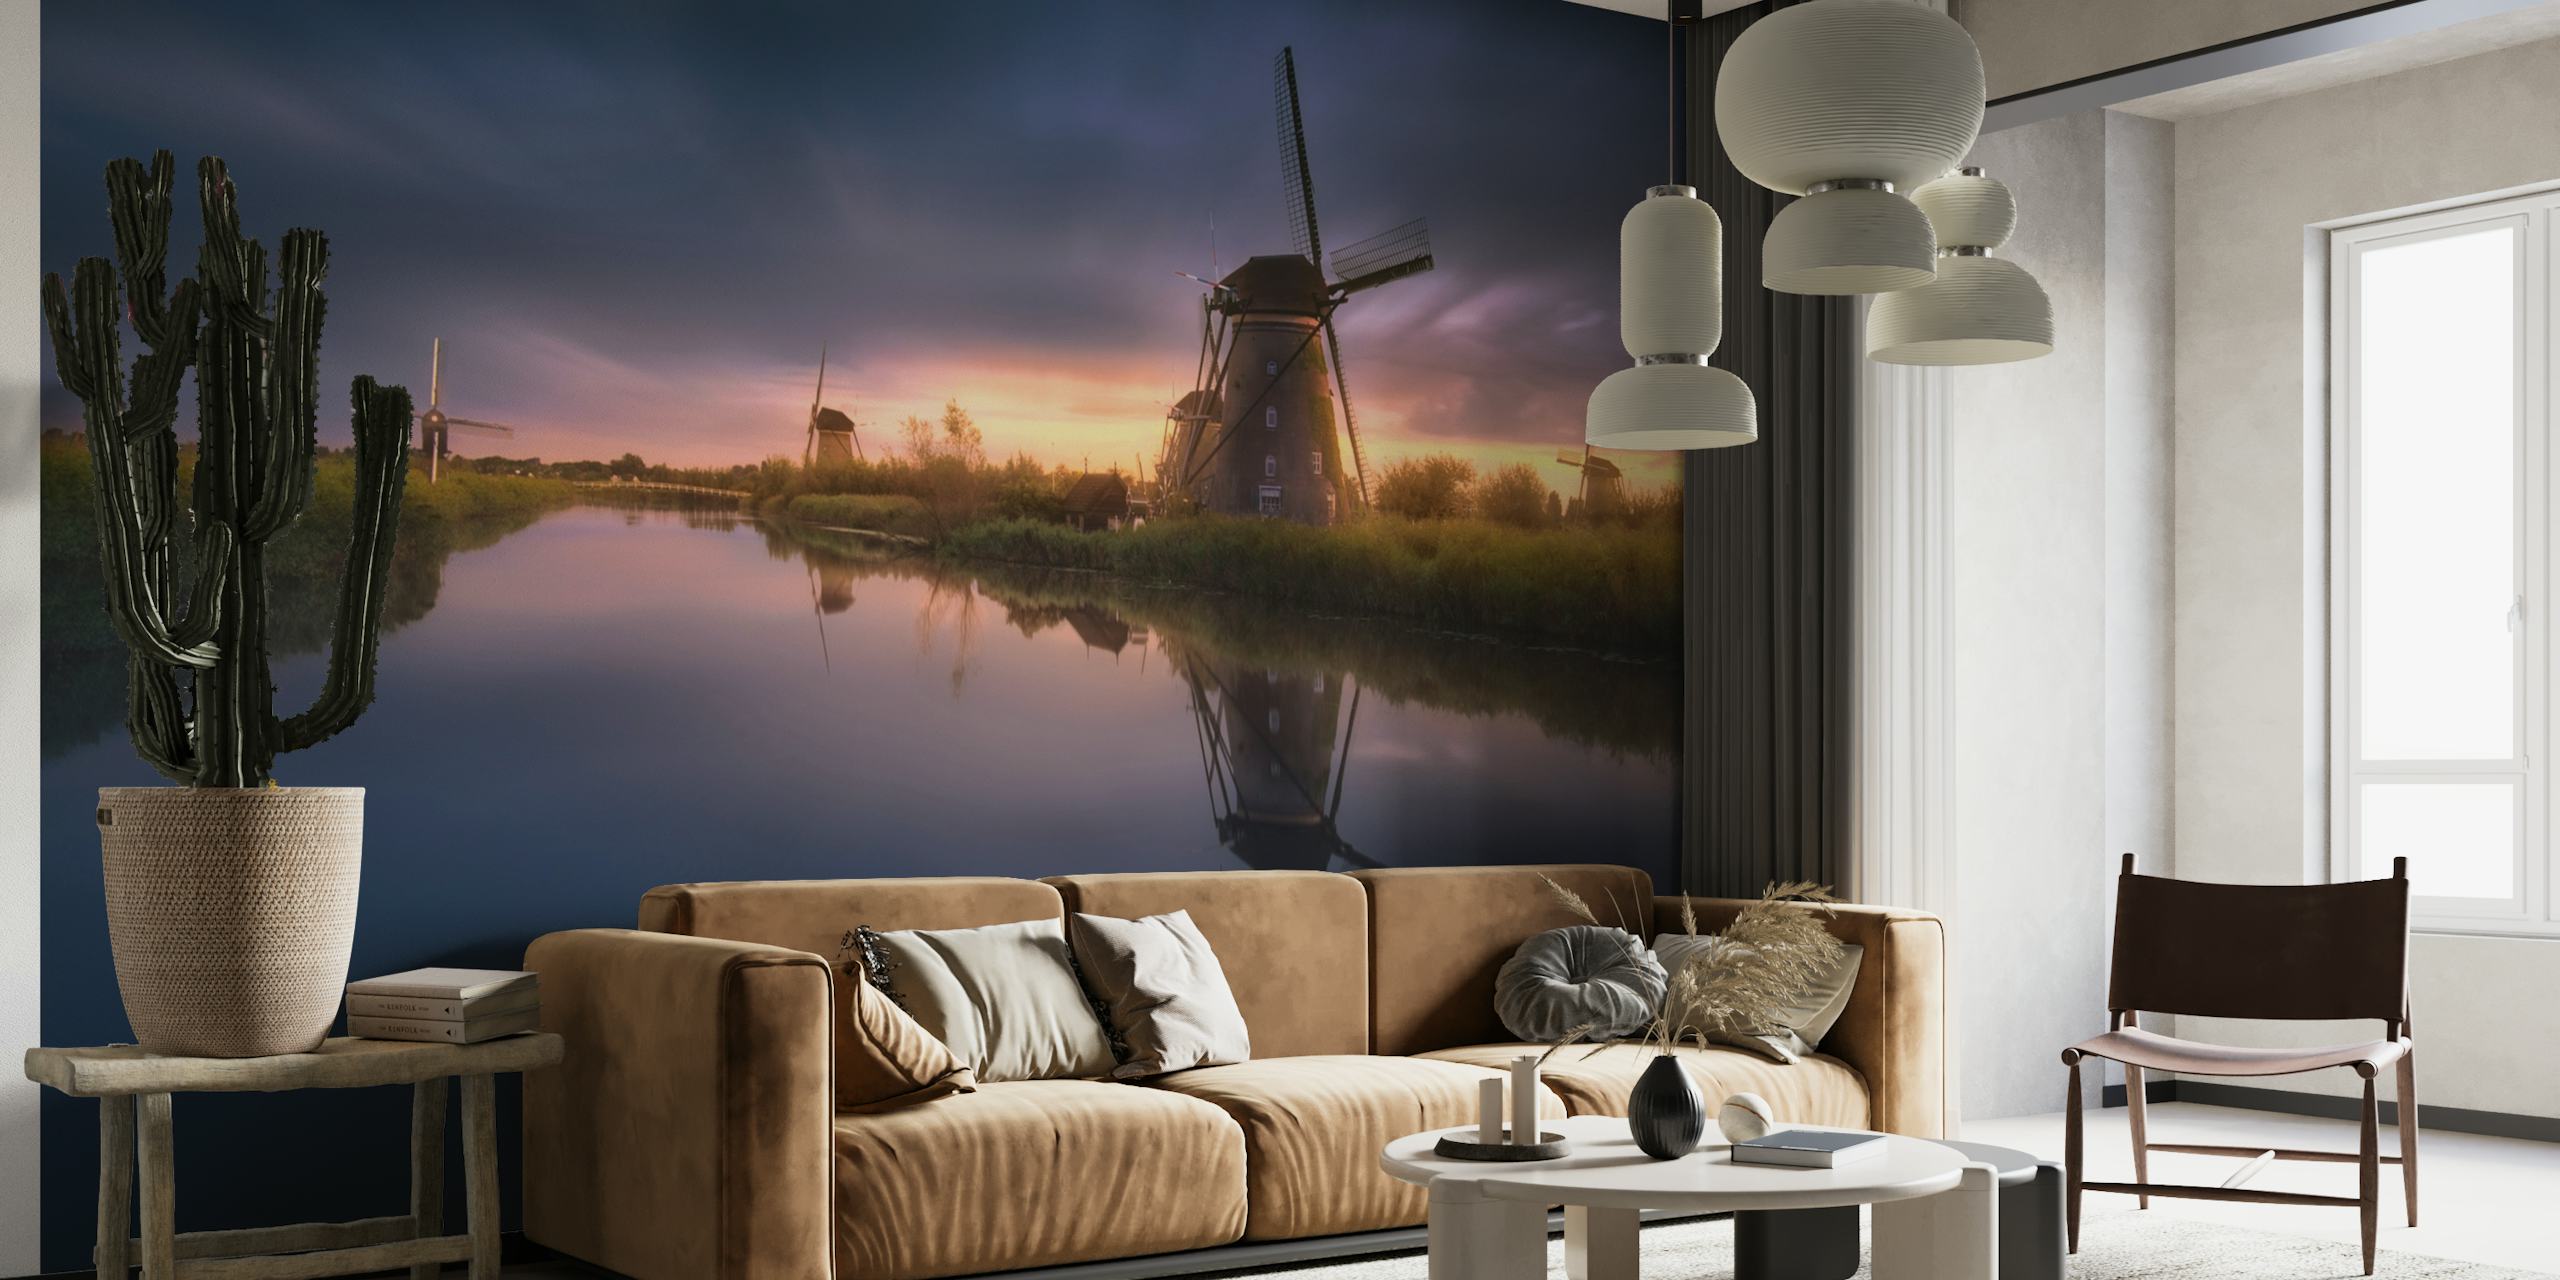 Kinderdijk Windmills wall mural with a sunset backdrop, reflecting in the calm water